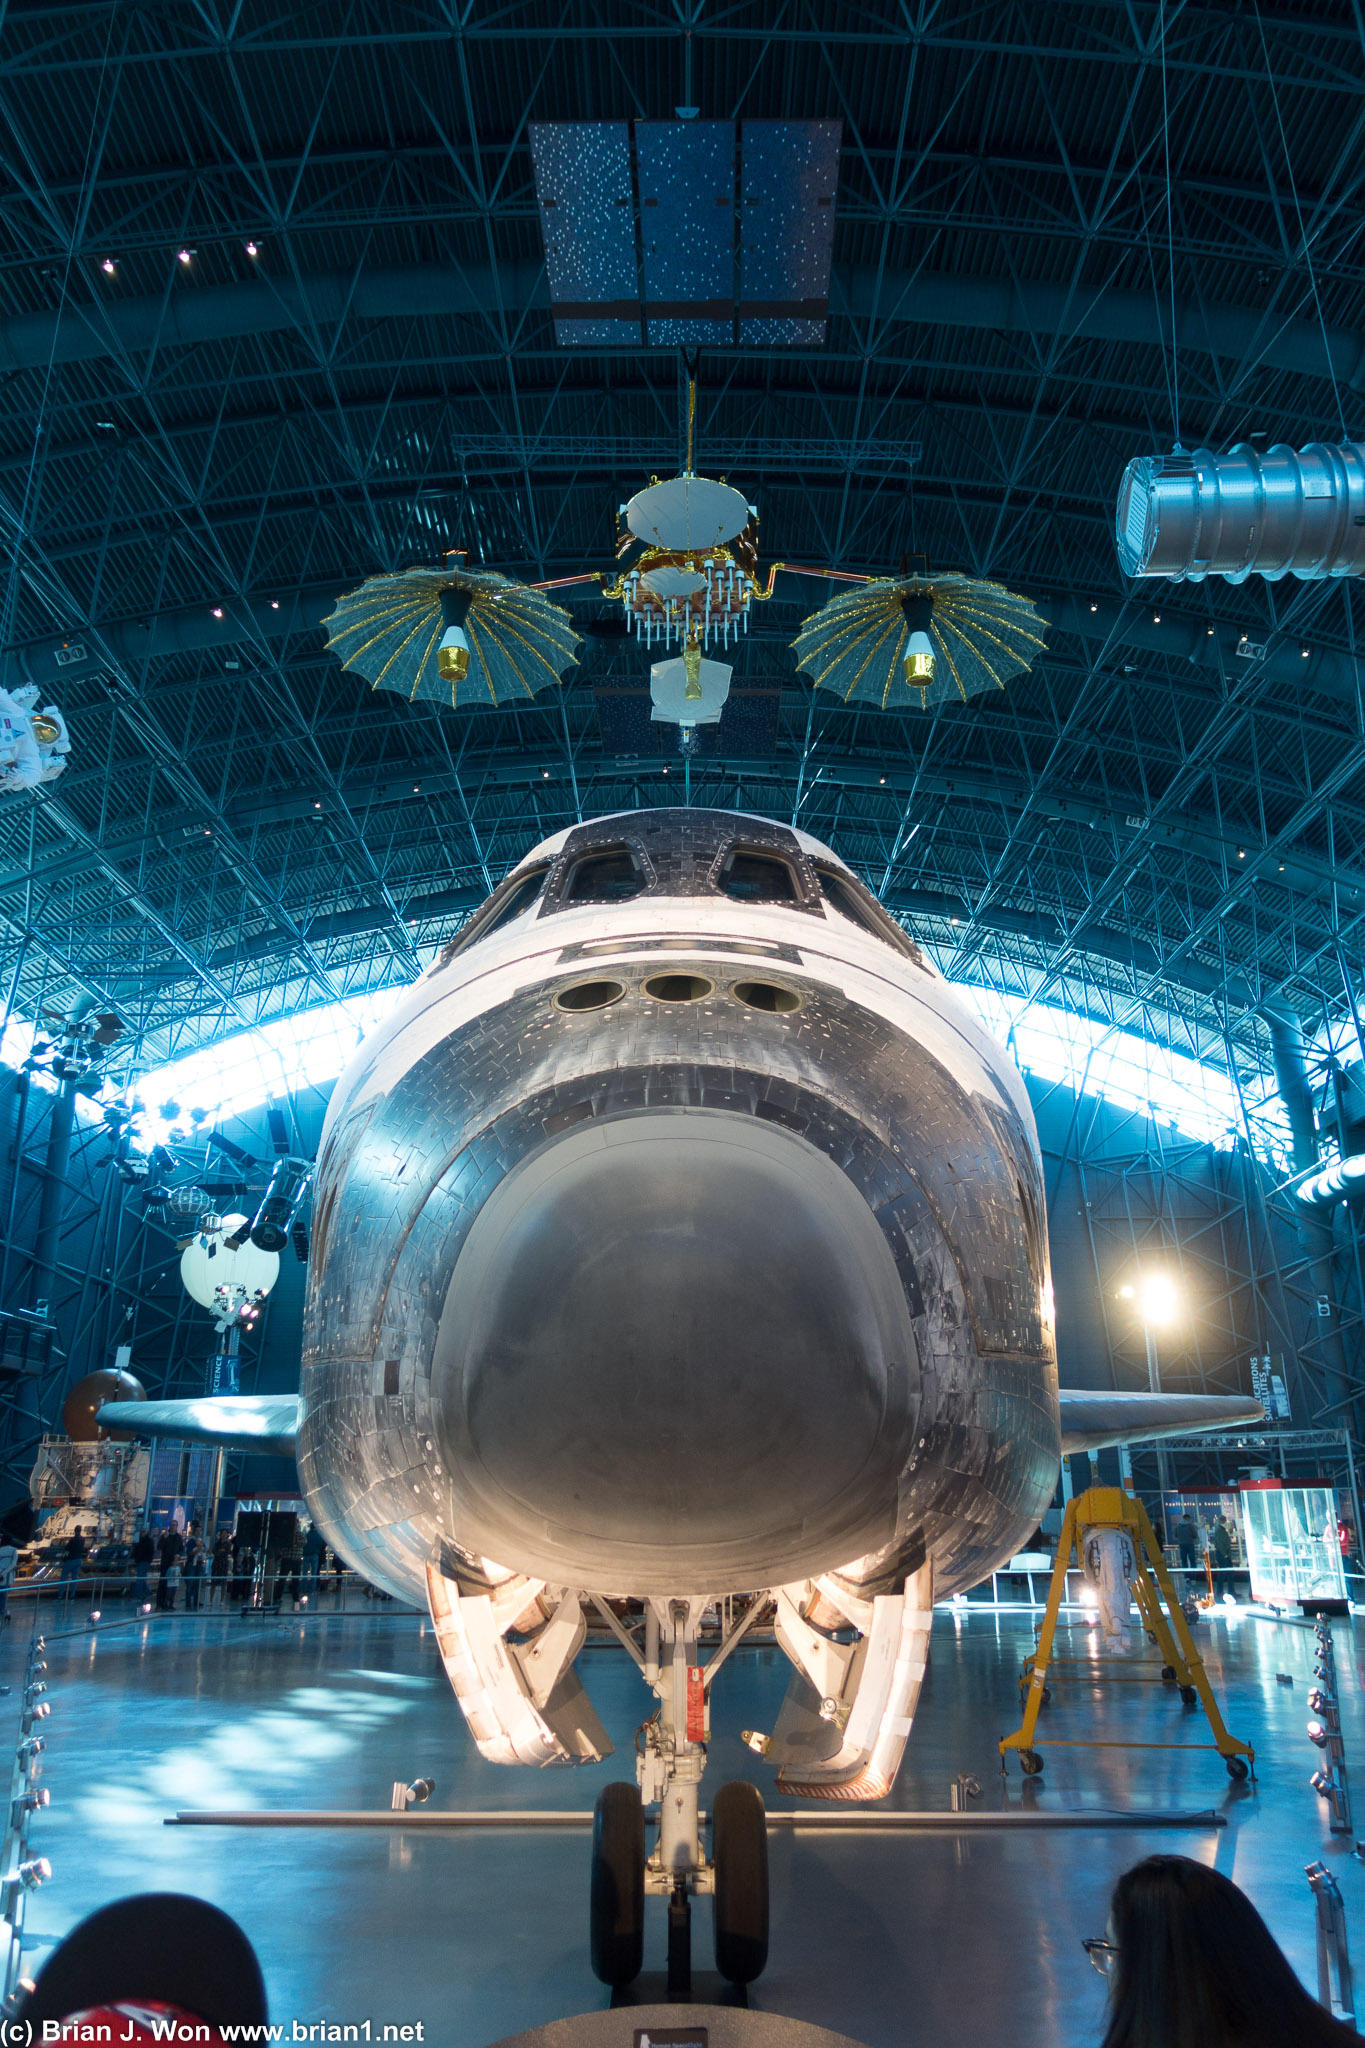 Space Shuttle Discovery. I never tire of this sight.